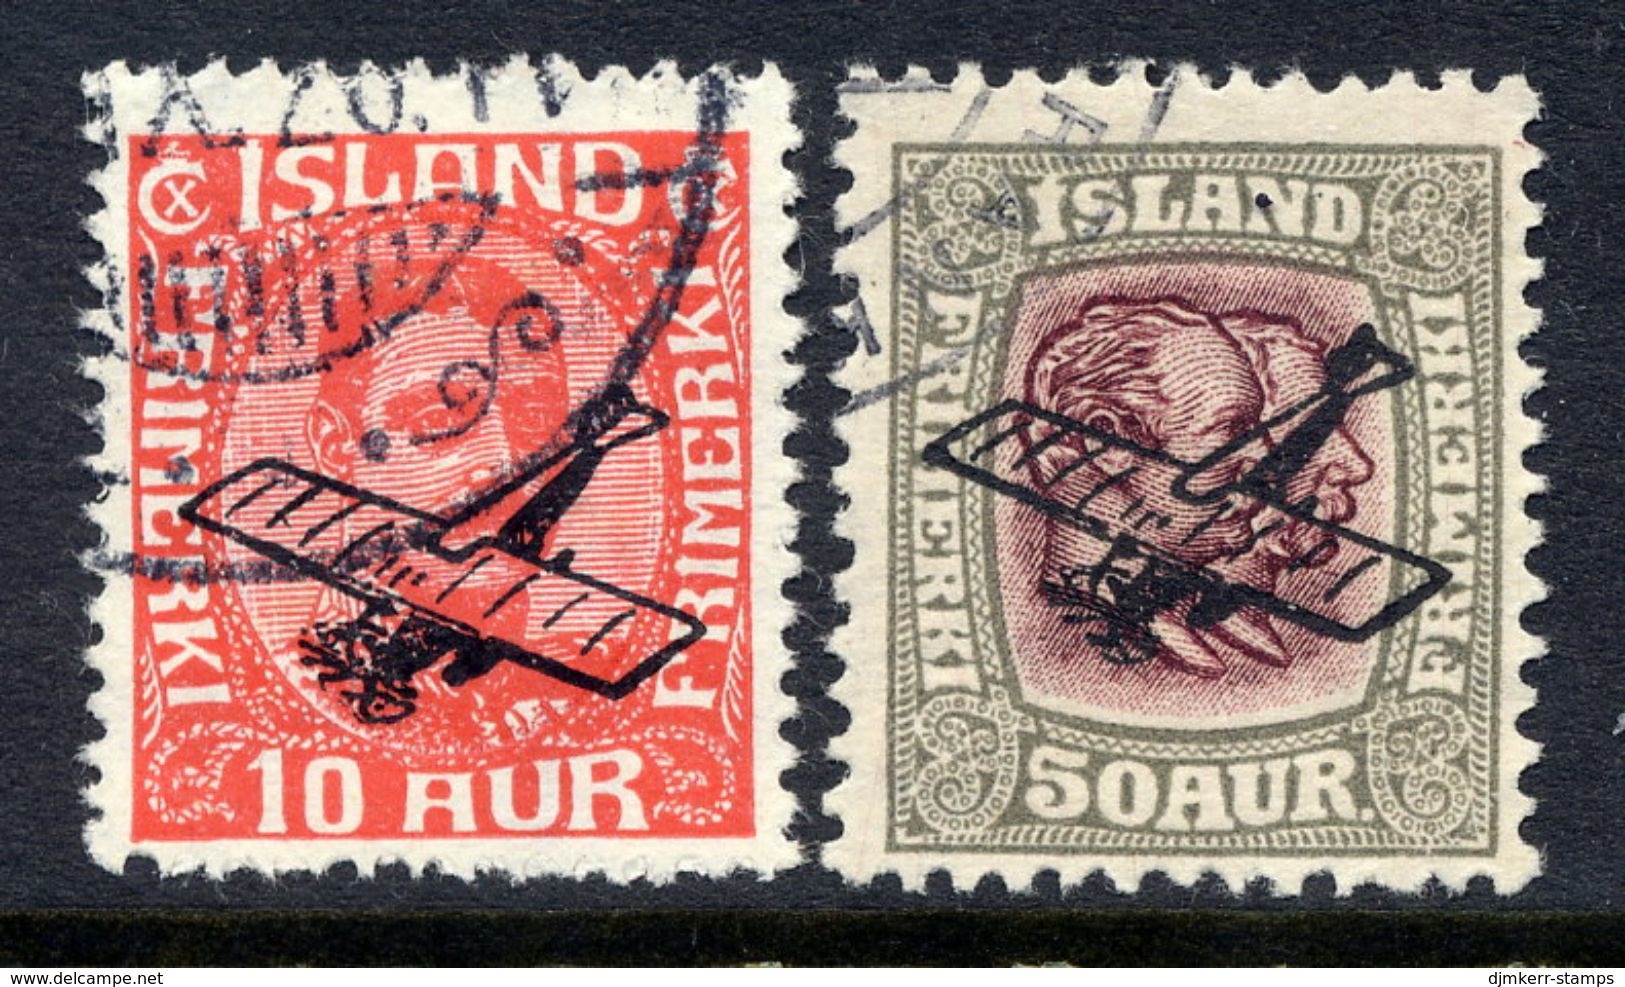 ICELAND 1928-29 Airmail Overprints, Used.  Michel 122-23 - Luchtpost